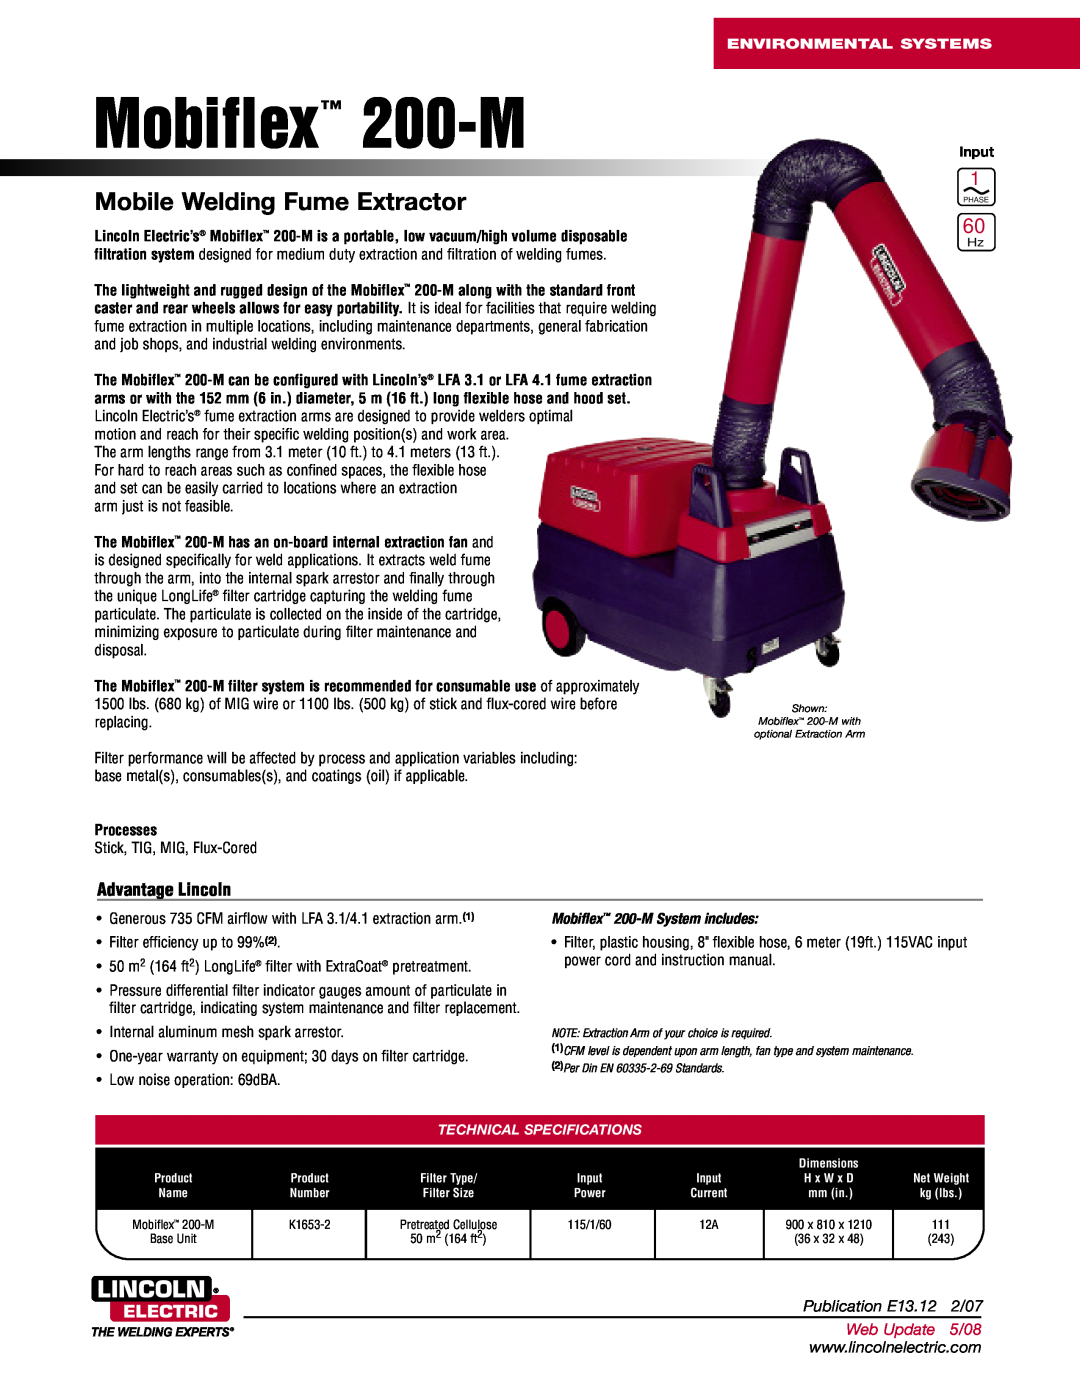 Lincoln Electric warranty Advantage Lincoln, Environmental Systems, Mobiflex 200-M, Mobile Welding Fume Extractor 